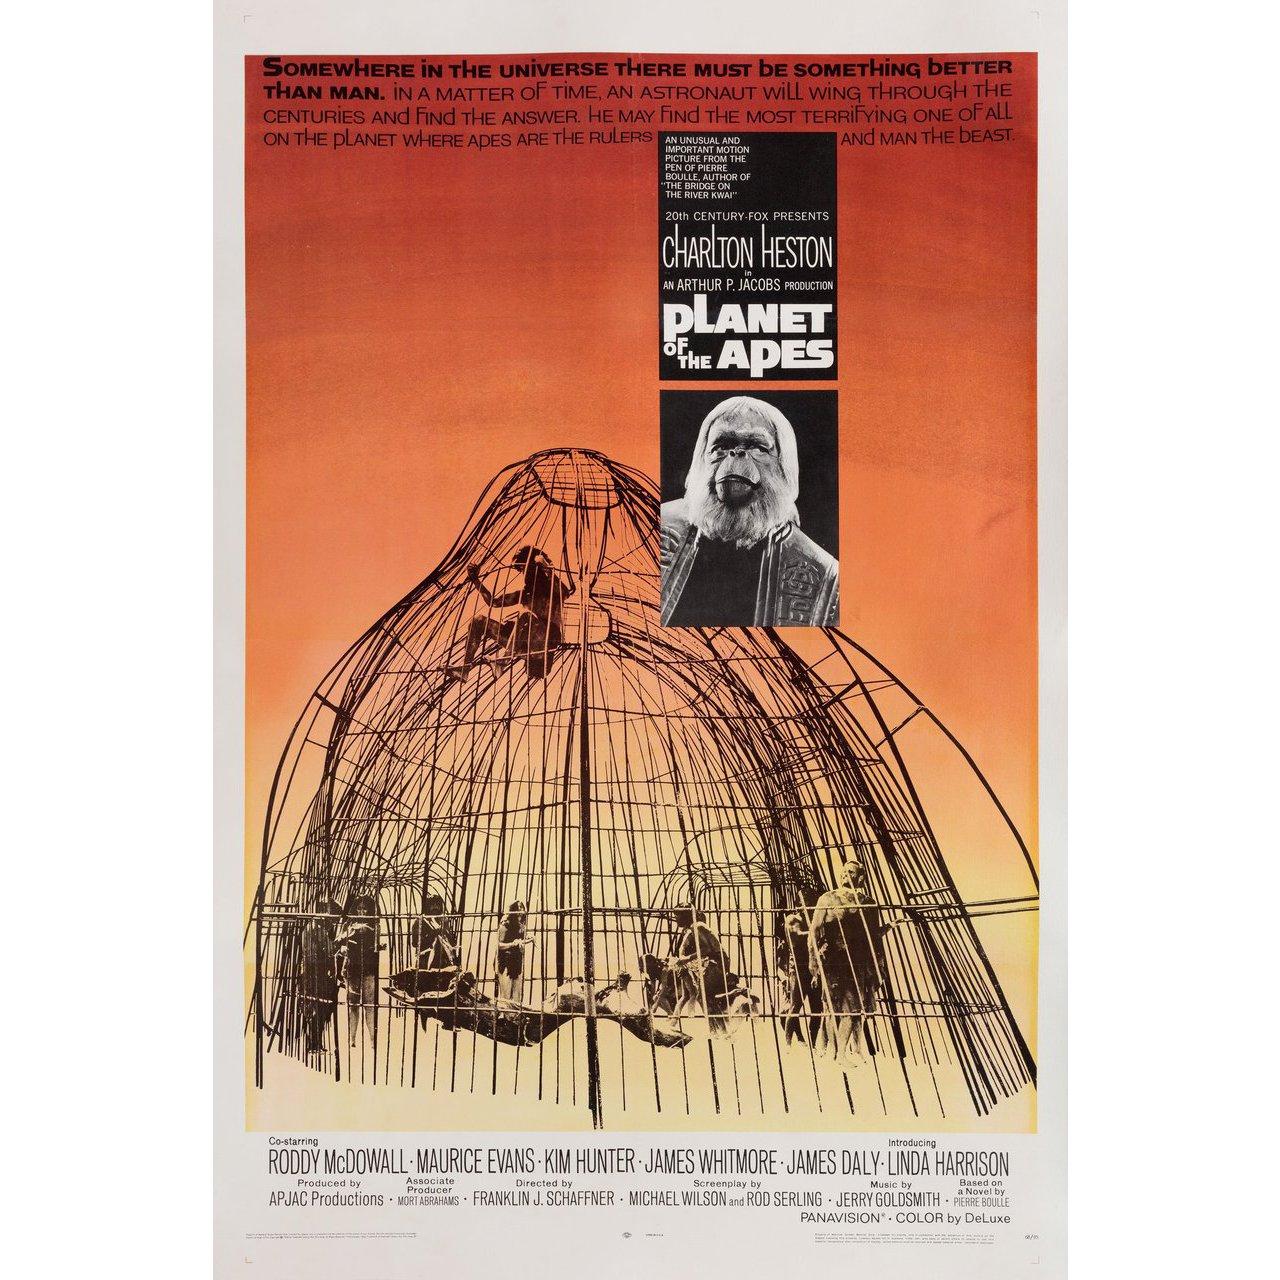 American Planet of the Apes 1968 U.S. One Sheet Film Poster For Sale